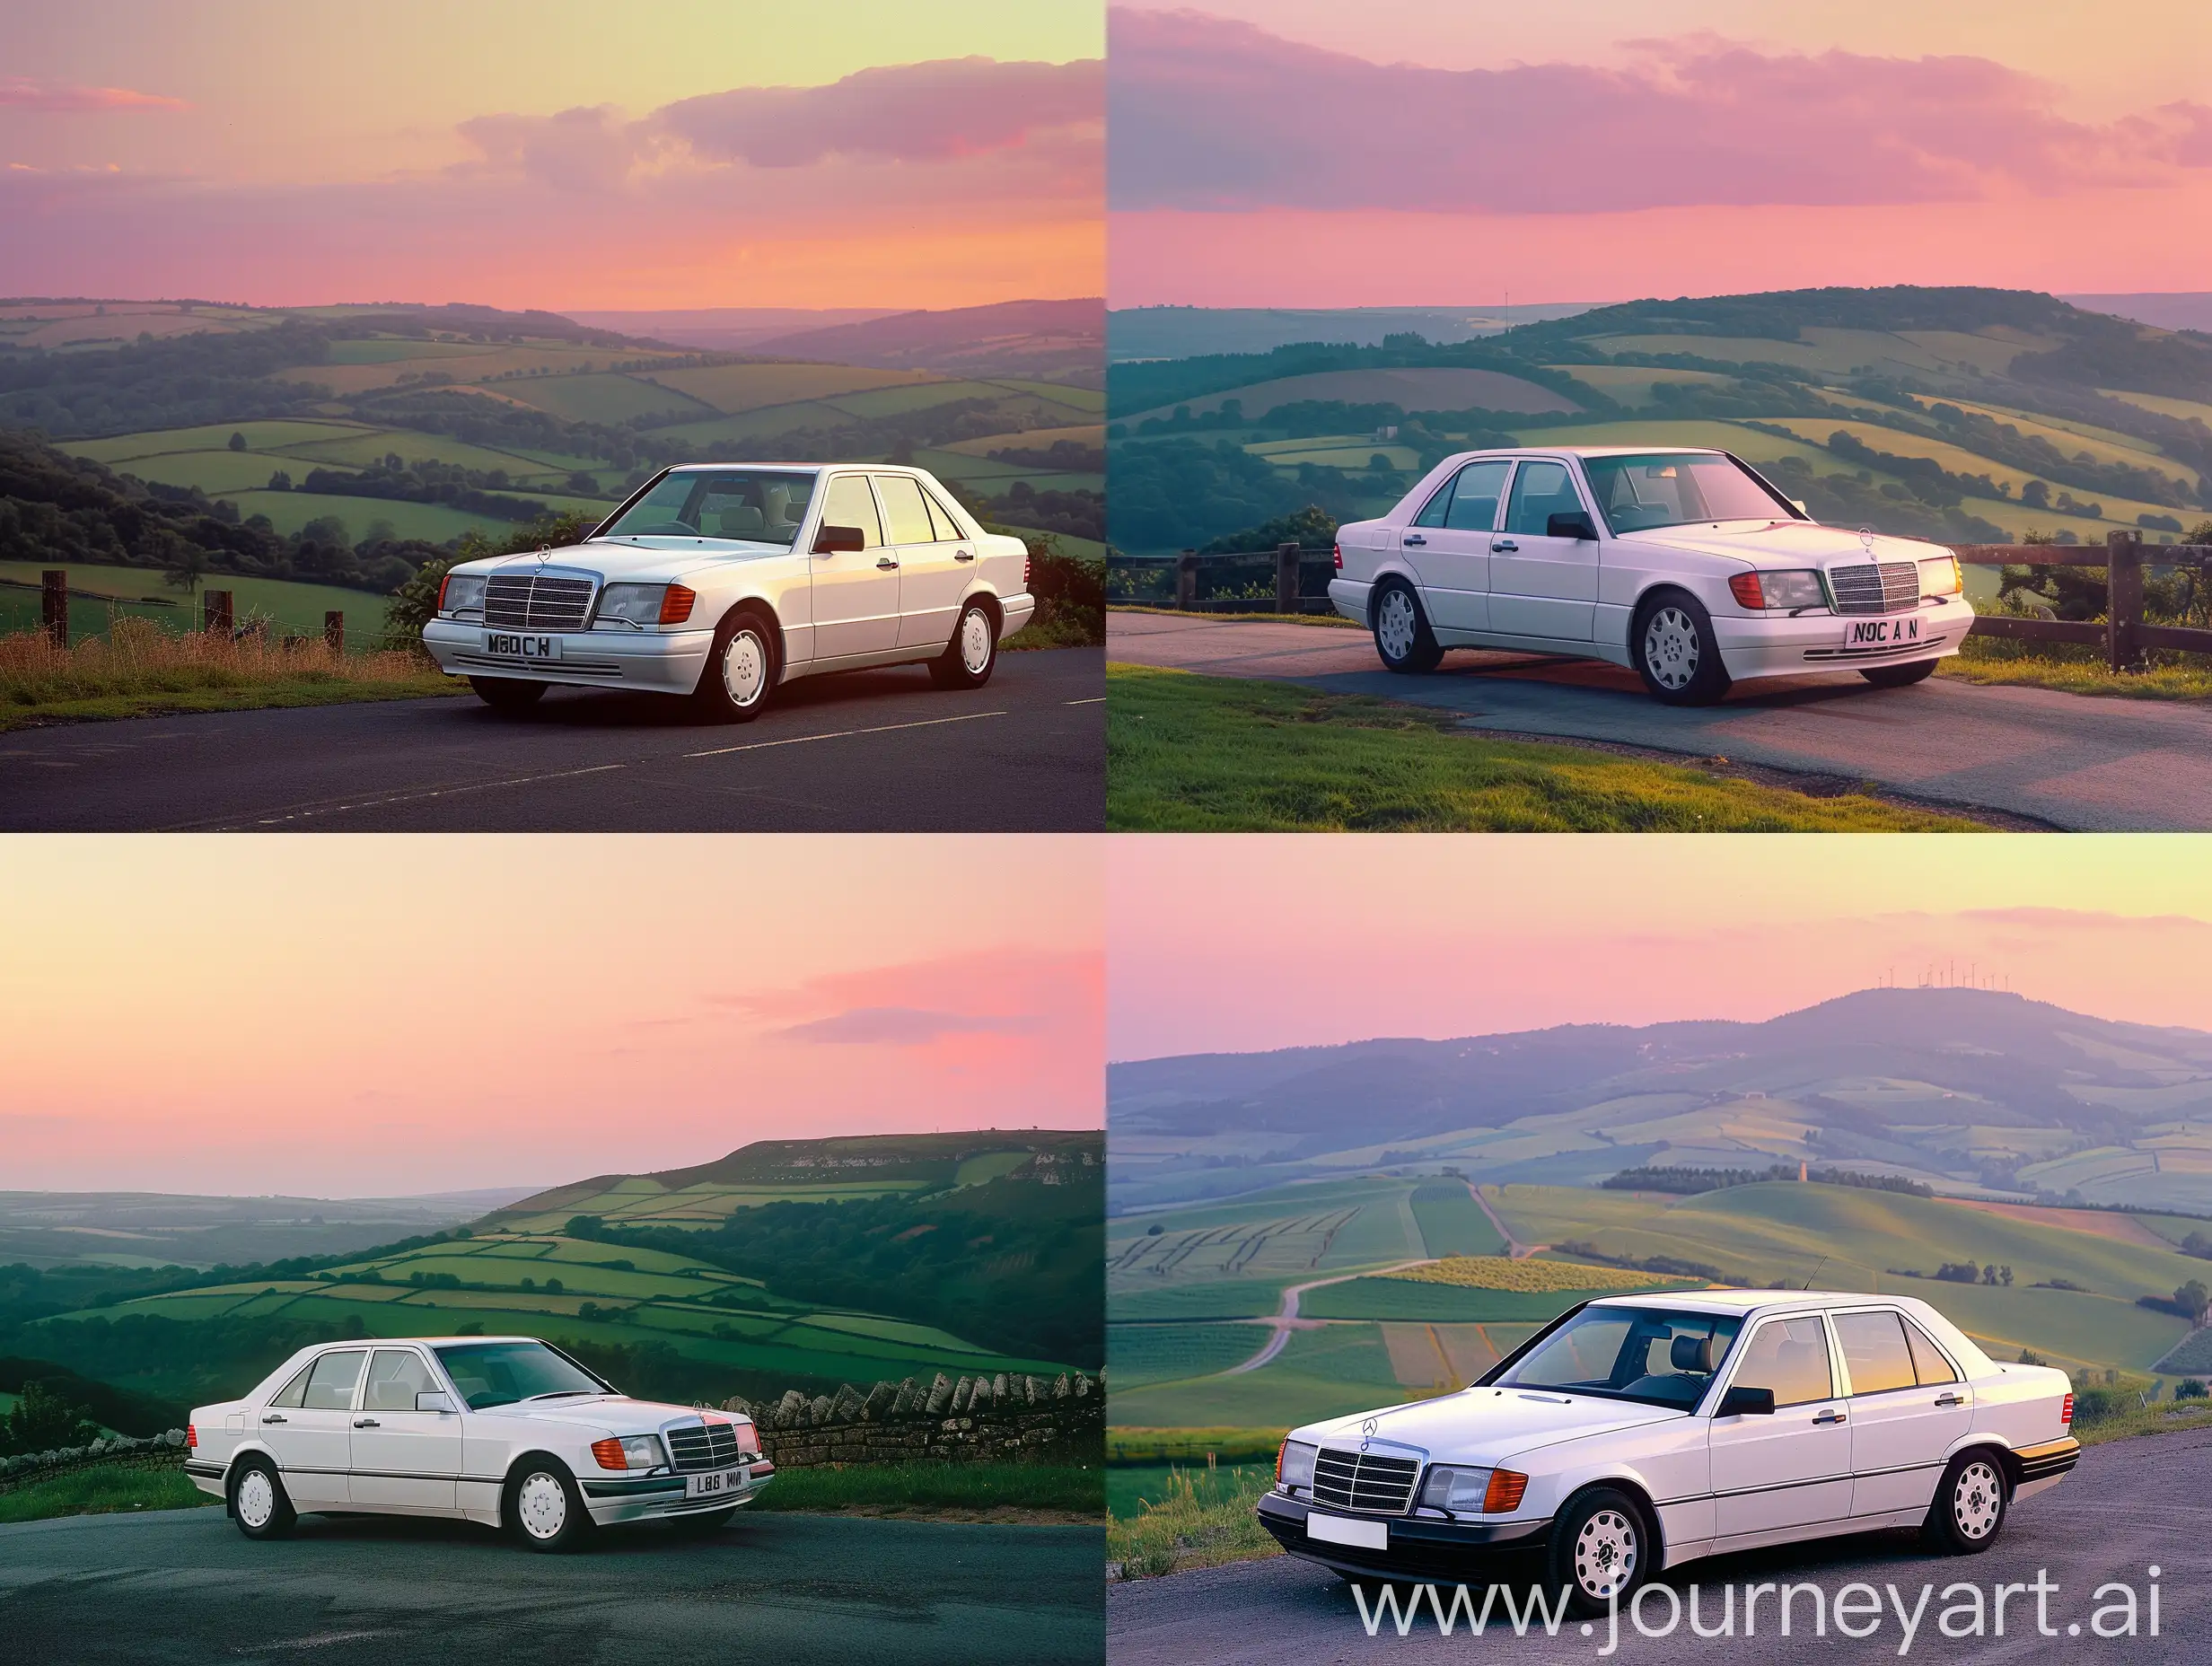 Vintage-White-Mercedes-Sedan-Driving-Along-Summer-Country-Road-at-Sunset